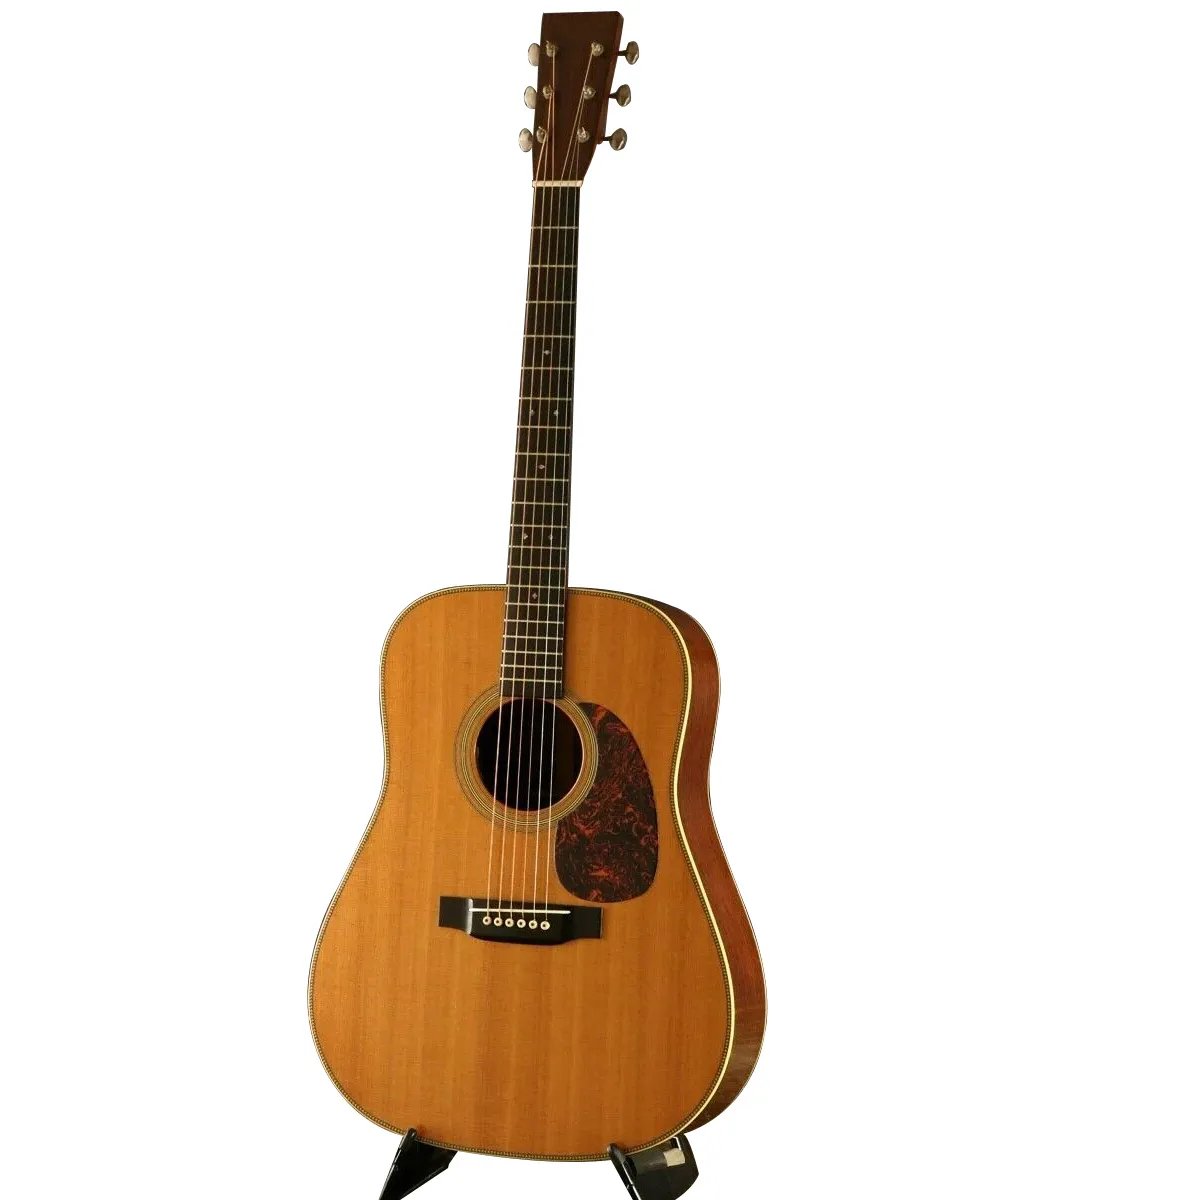 HD-28V 2004 Acoustic Guitar F/S as same of the pictures